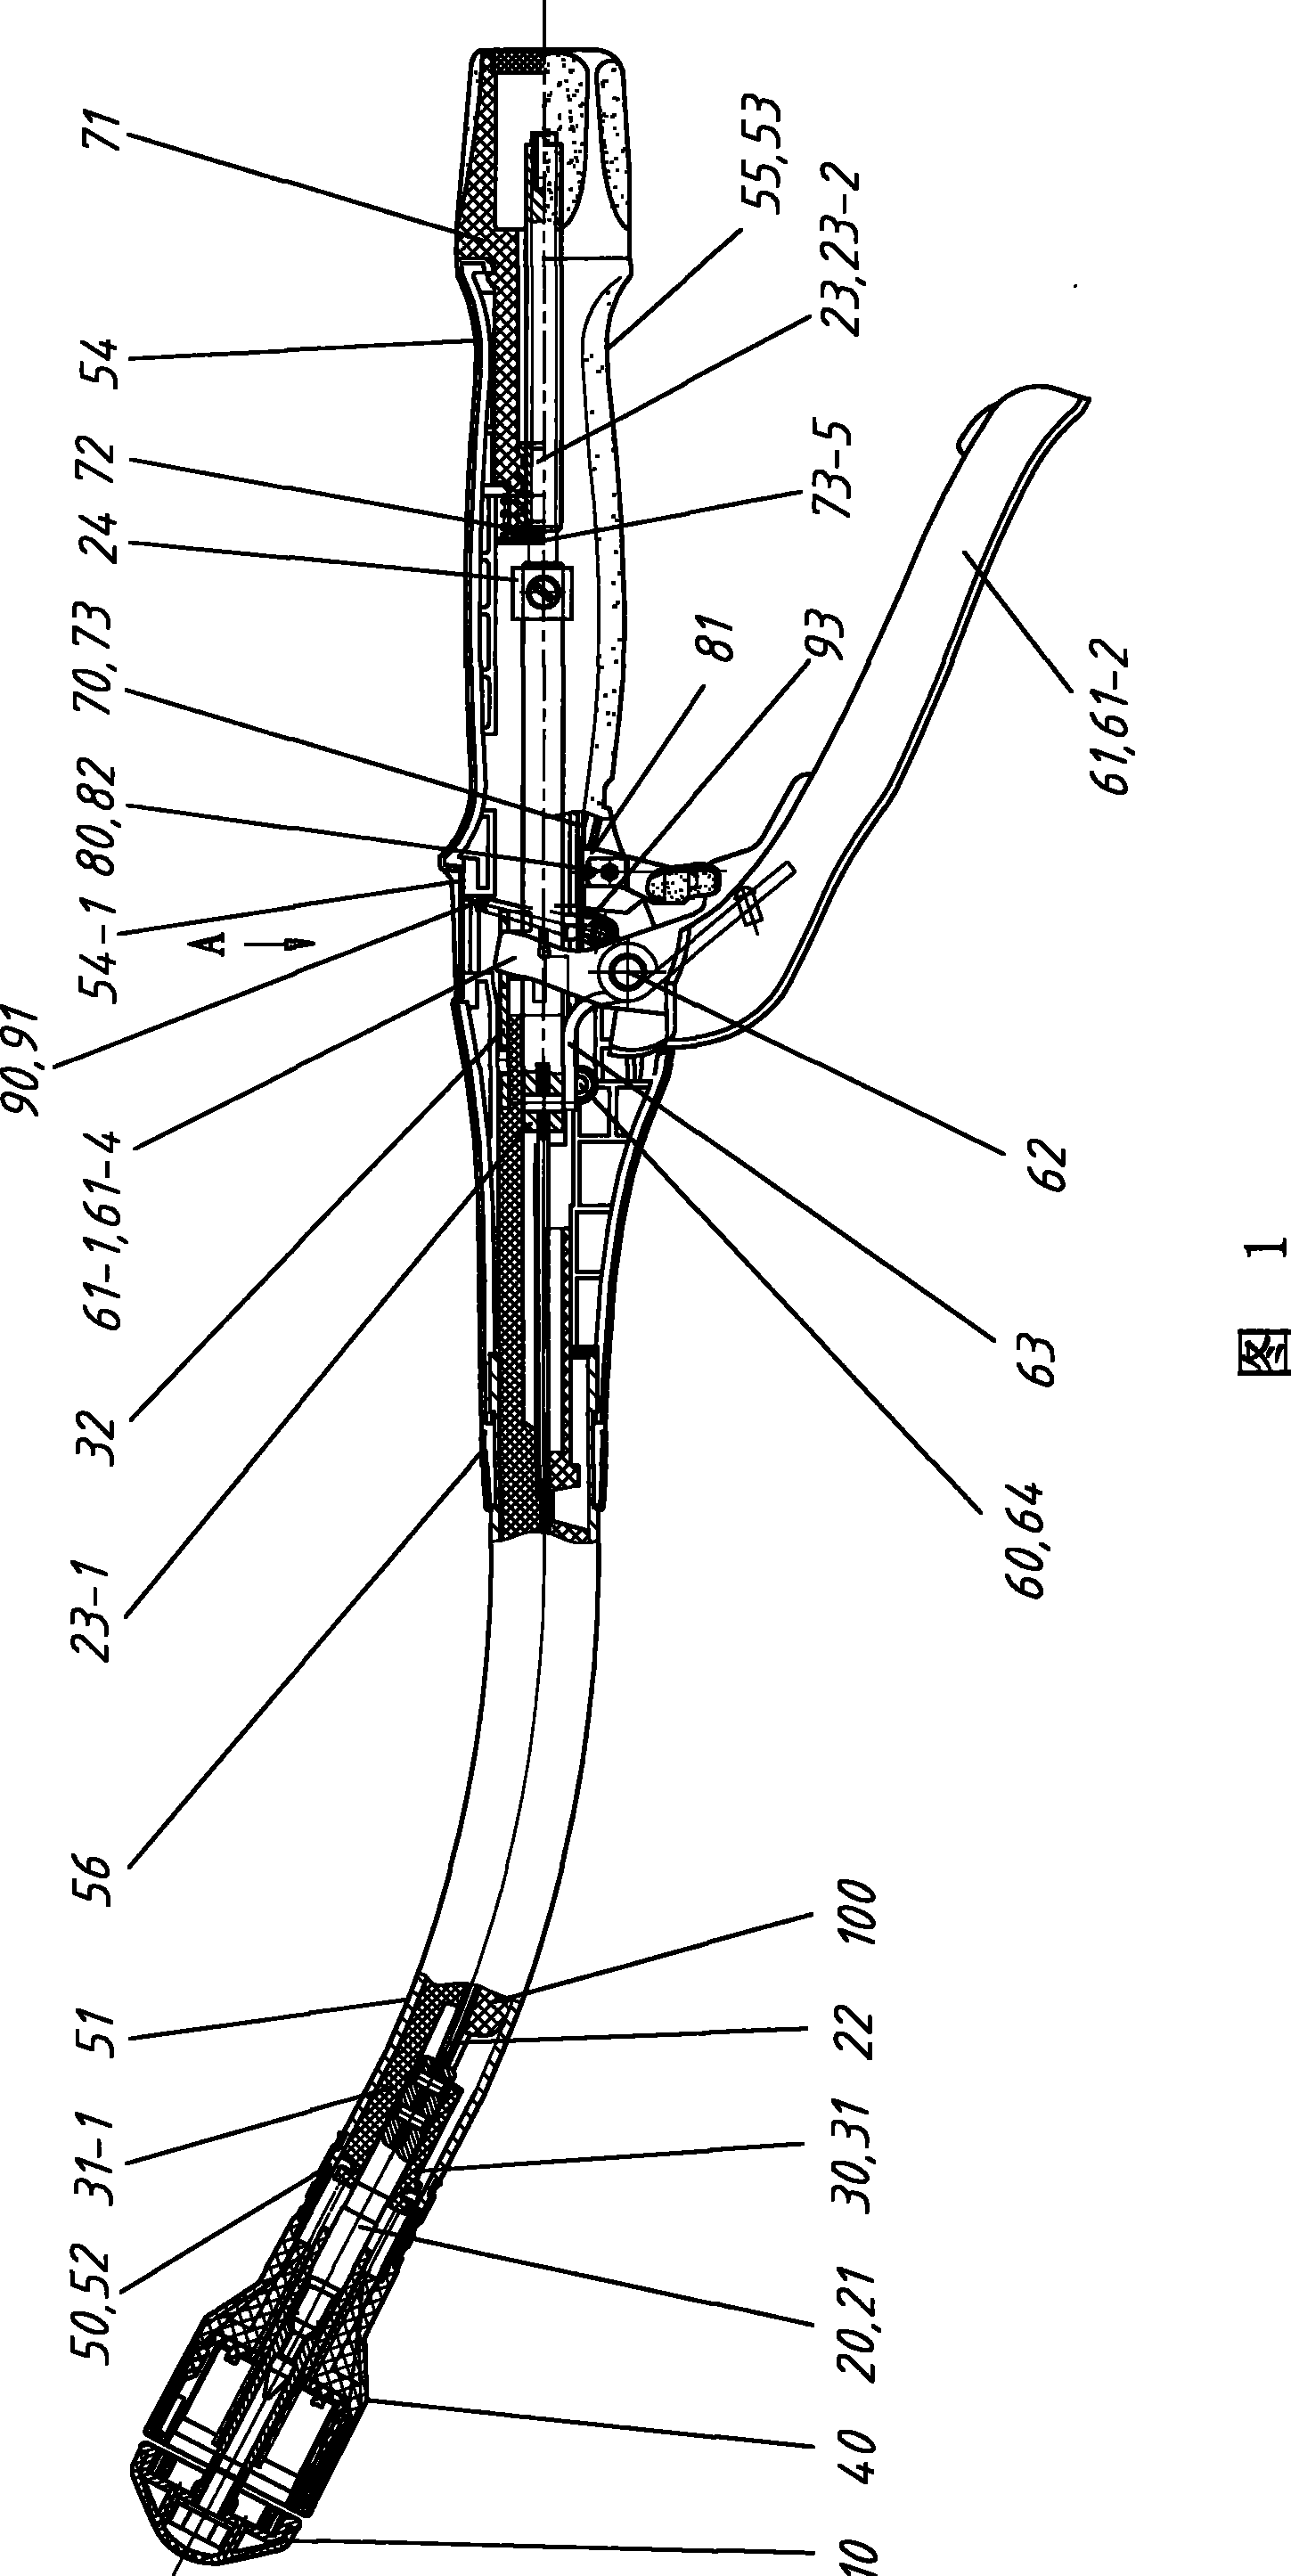 Tube type anastomat with insurance device and main body of anastomat thereof